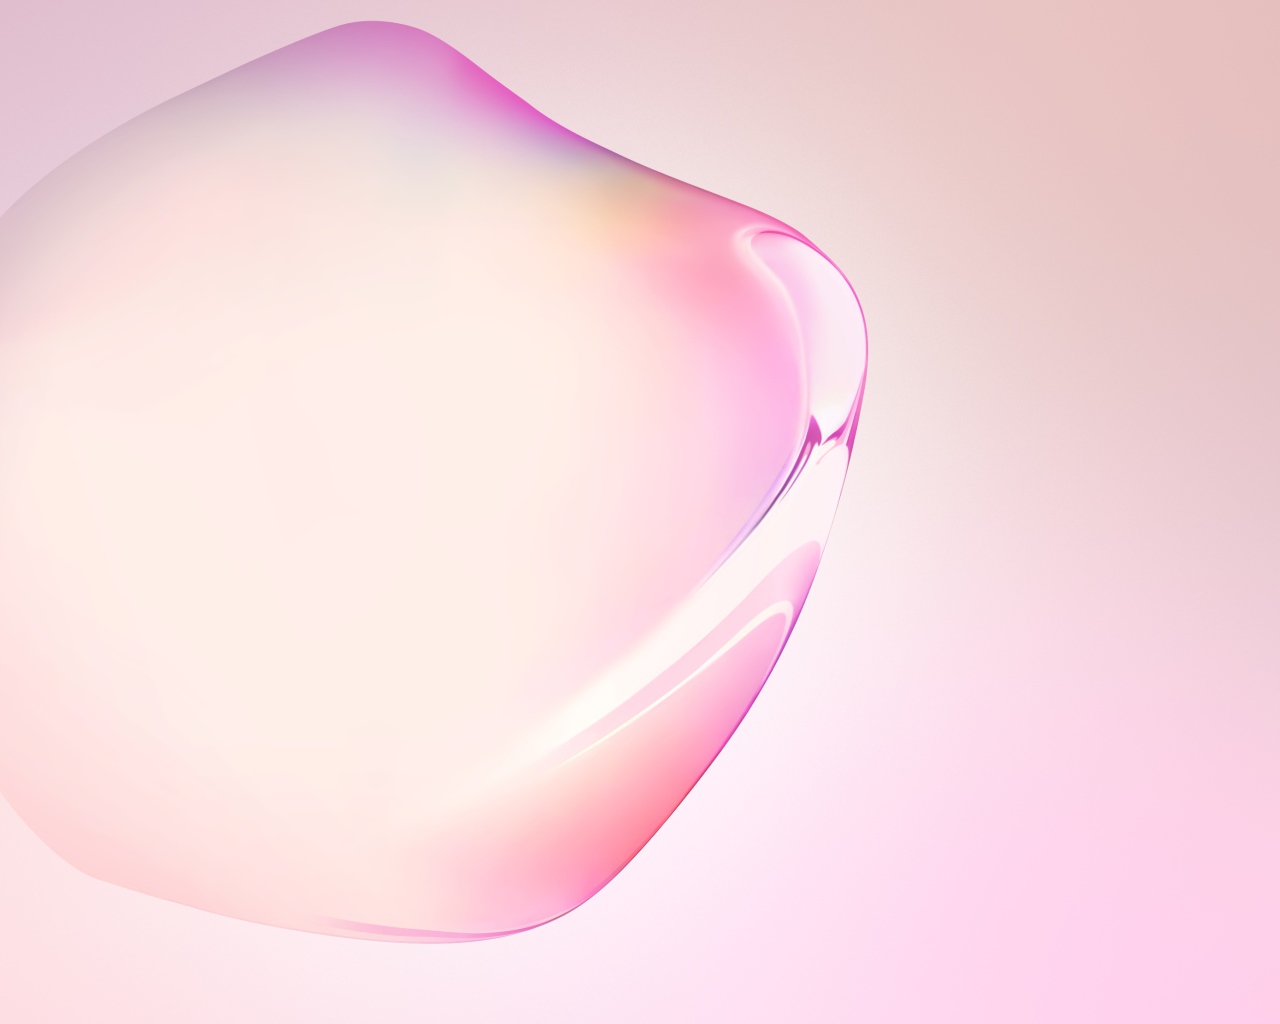 Transparent bubble on pink background